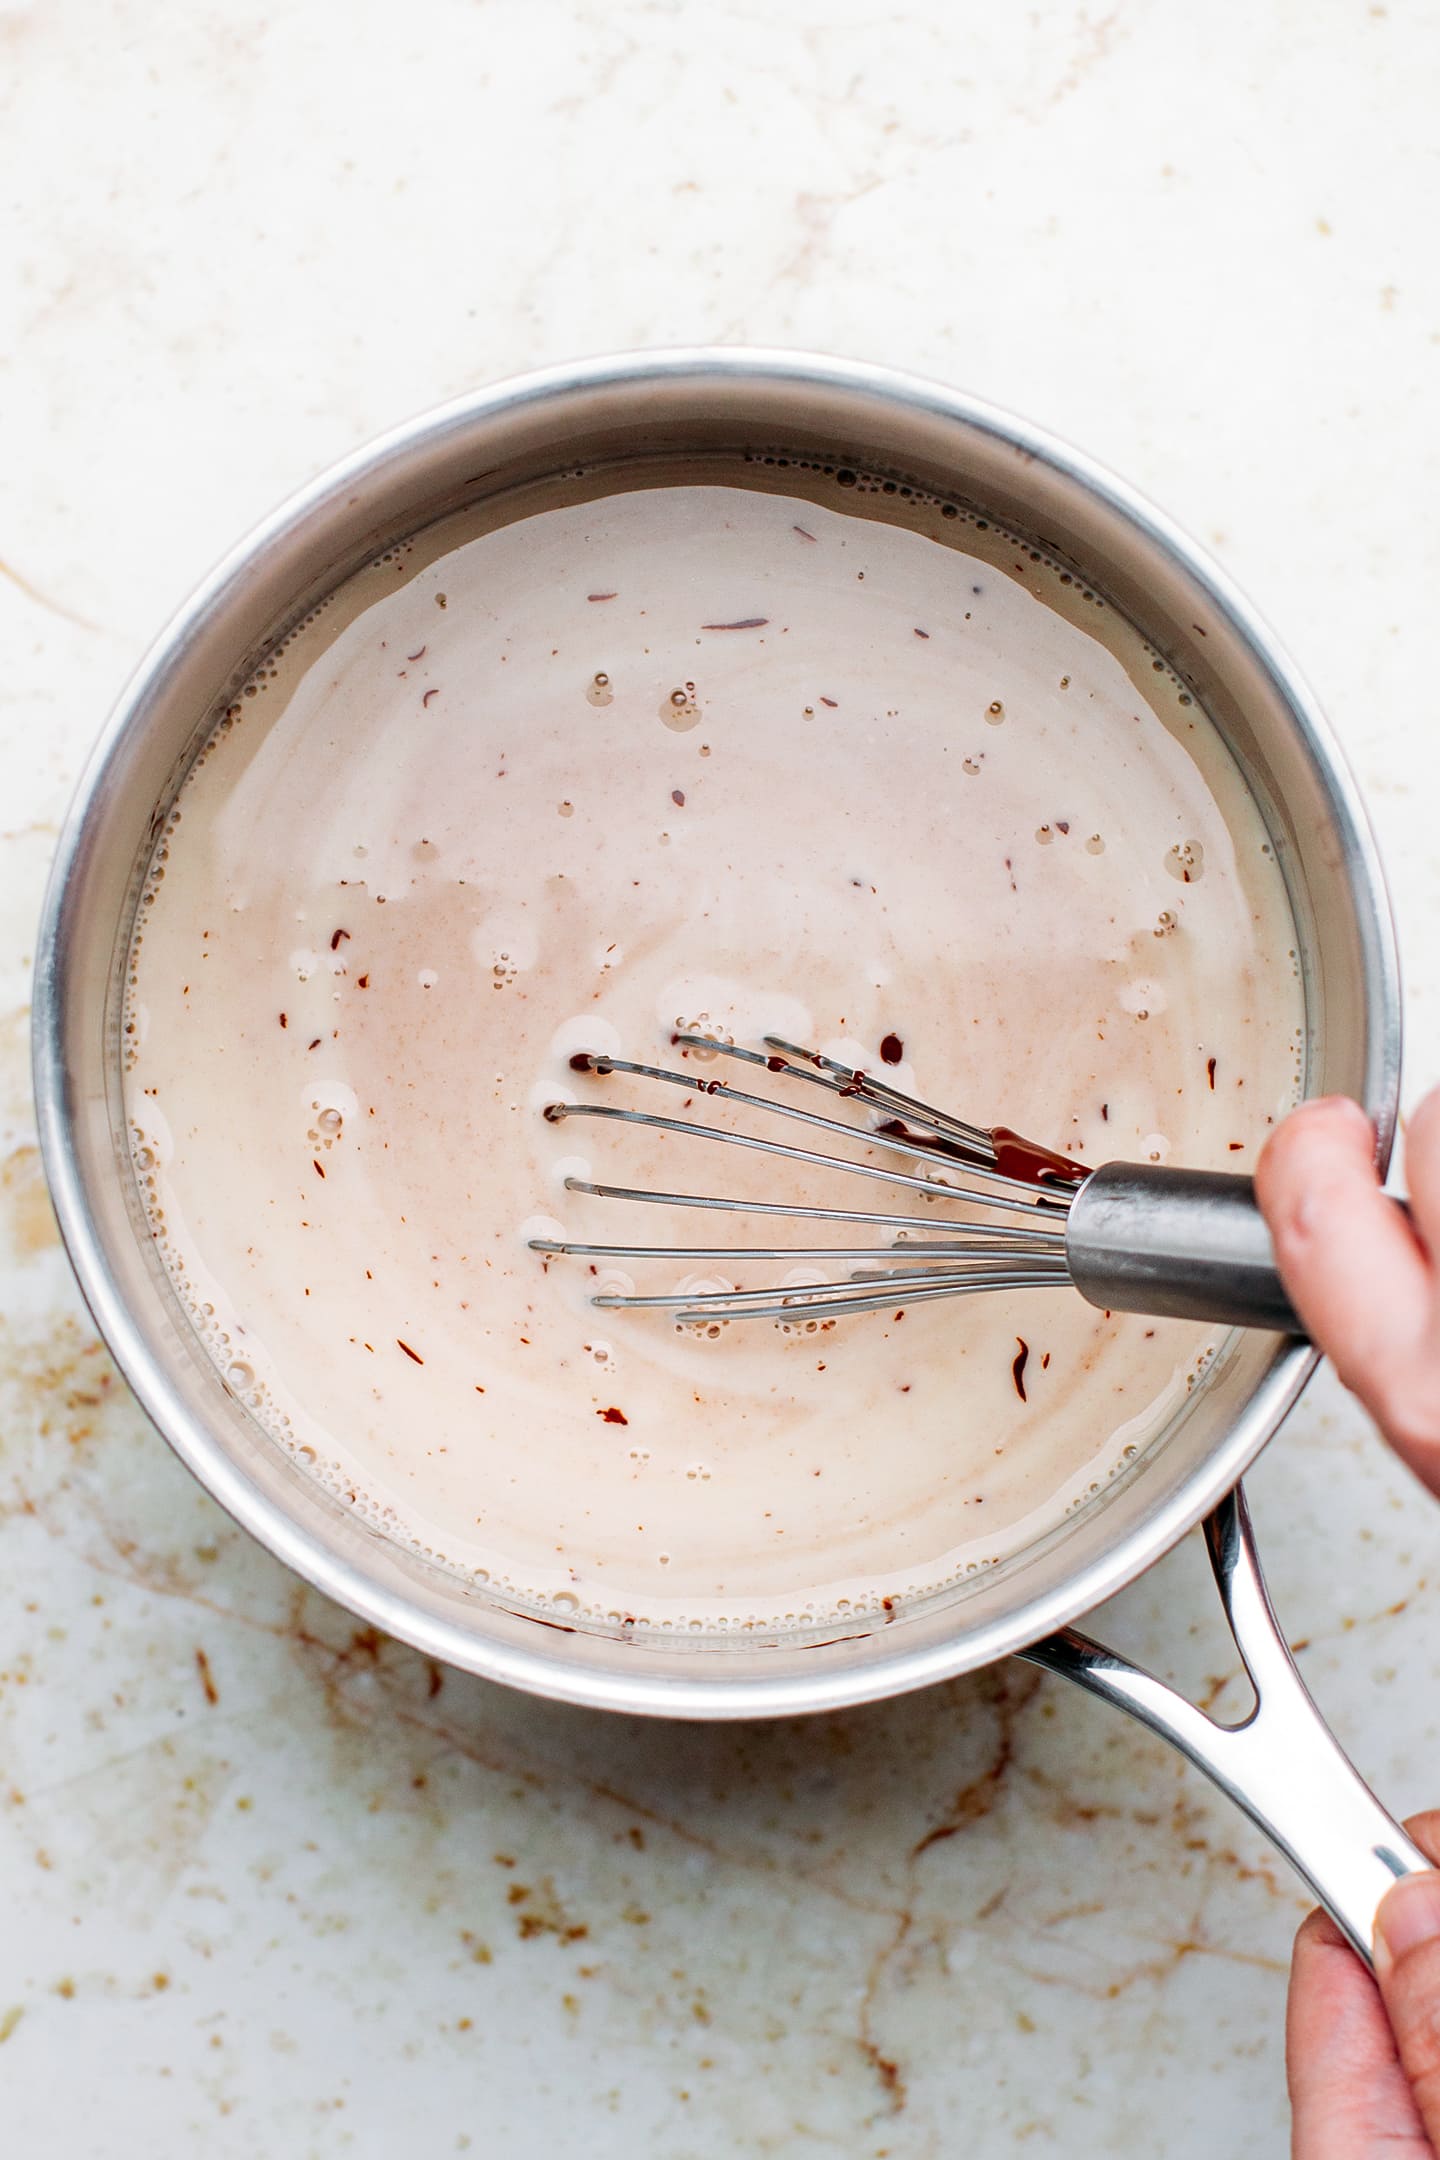 Whisking melted dark chocolate and milk in a saucepan.